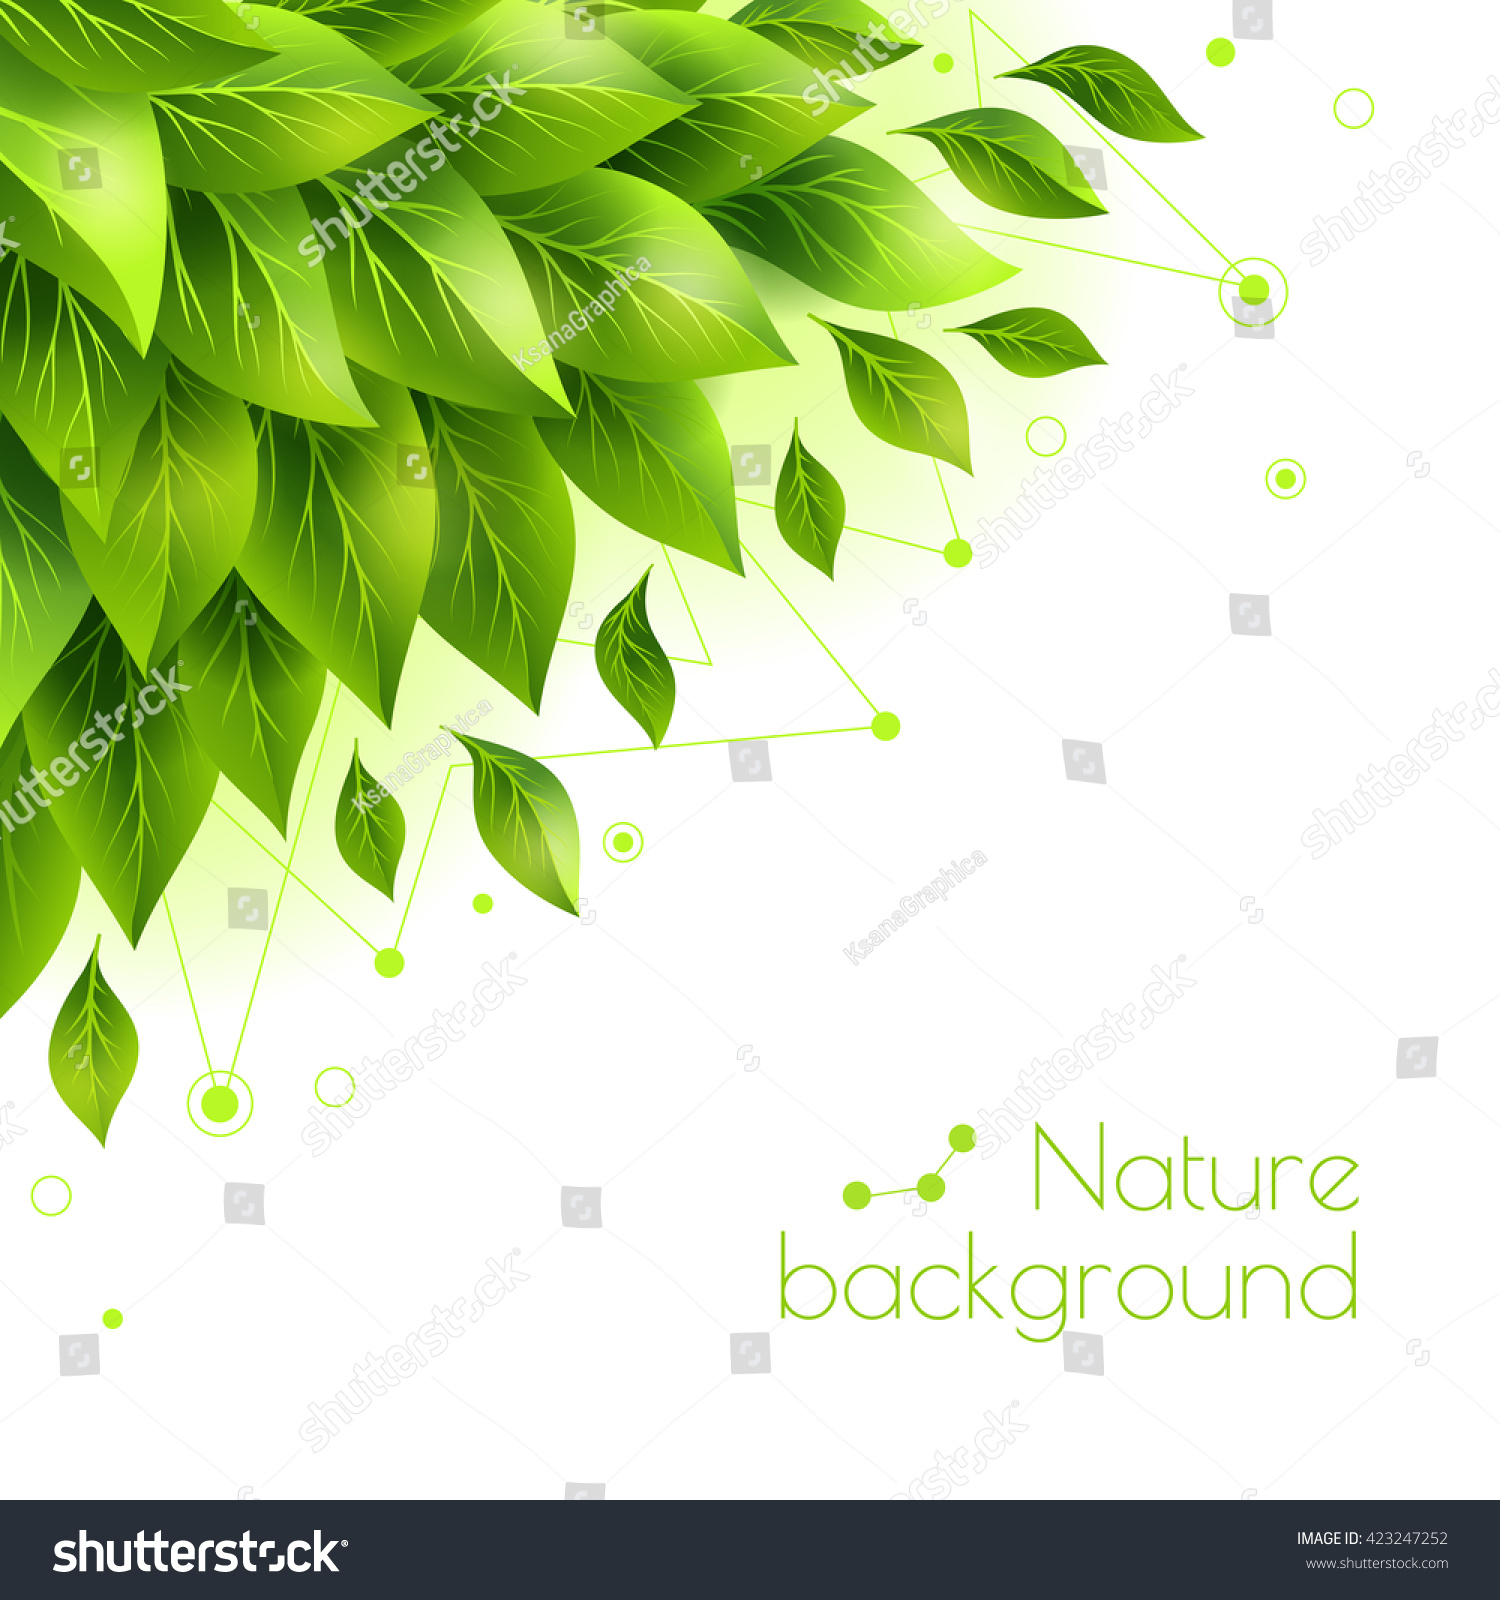 Green Leaves Banner  Copy Space Vector  Stock Vector  